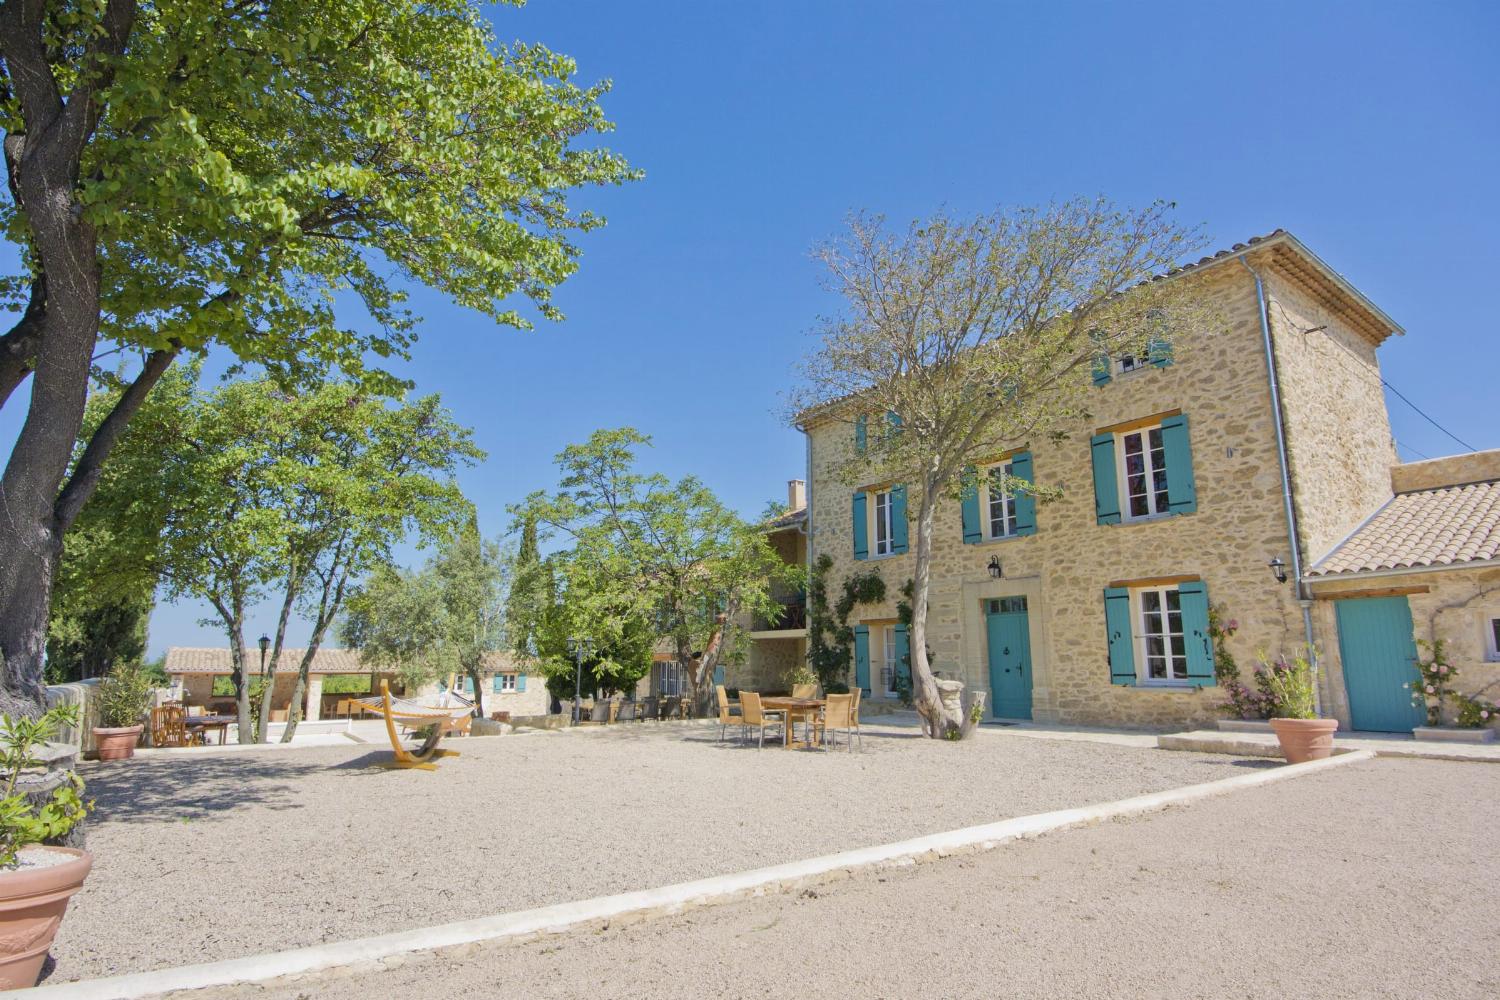 Rental accommodation in Provence